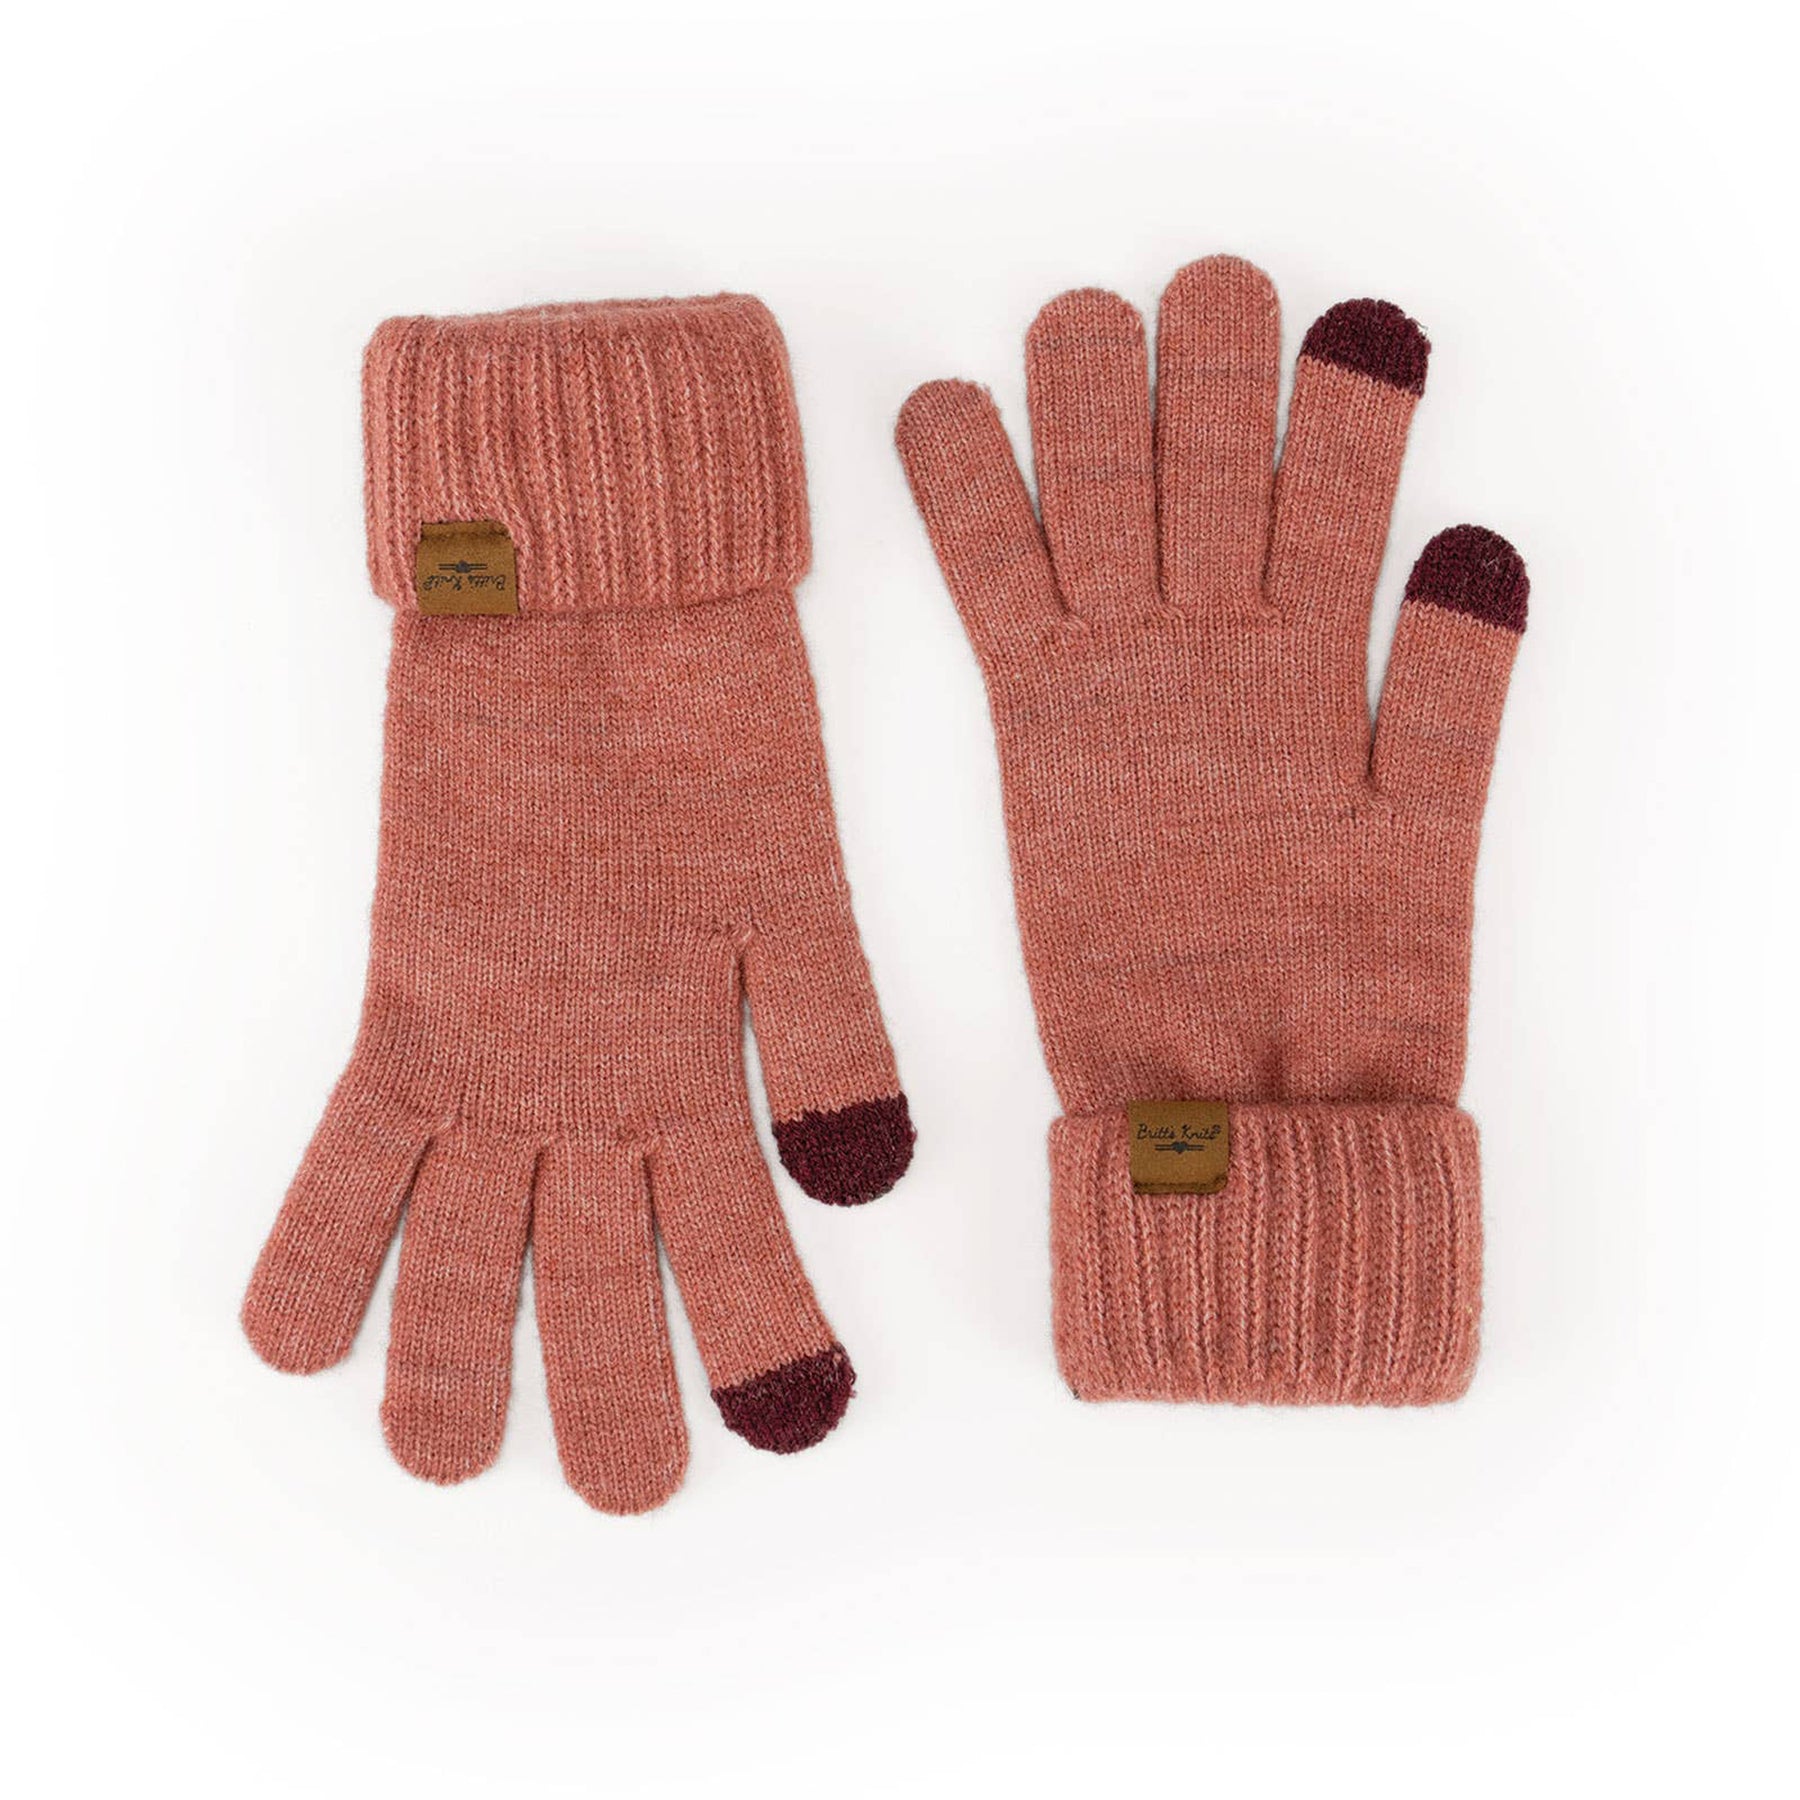 Britt's Knits Gloves Assorted Colors – The Maryland Store